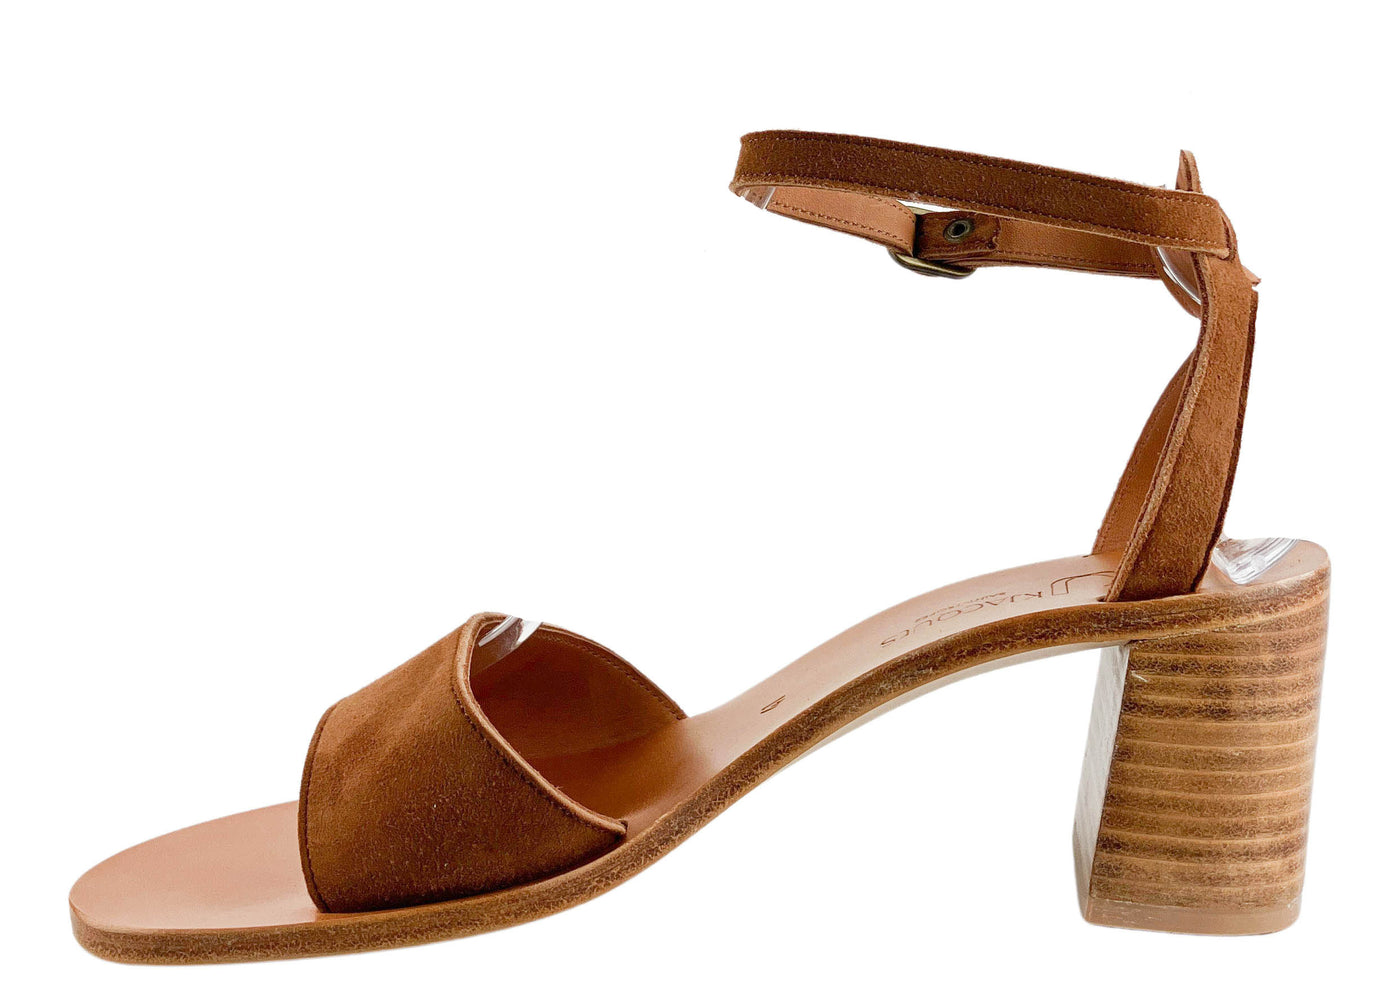 K.Jacques Albane Sandals in Amareto - Discounts on K. Jacques at UAL